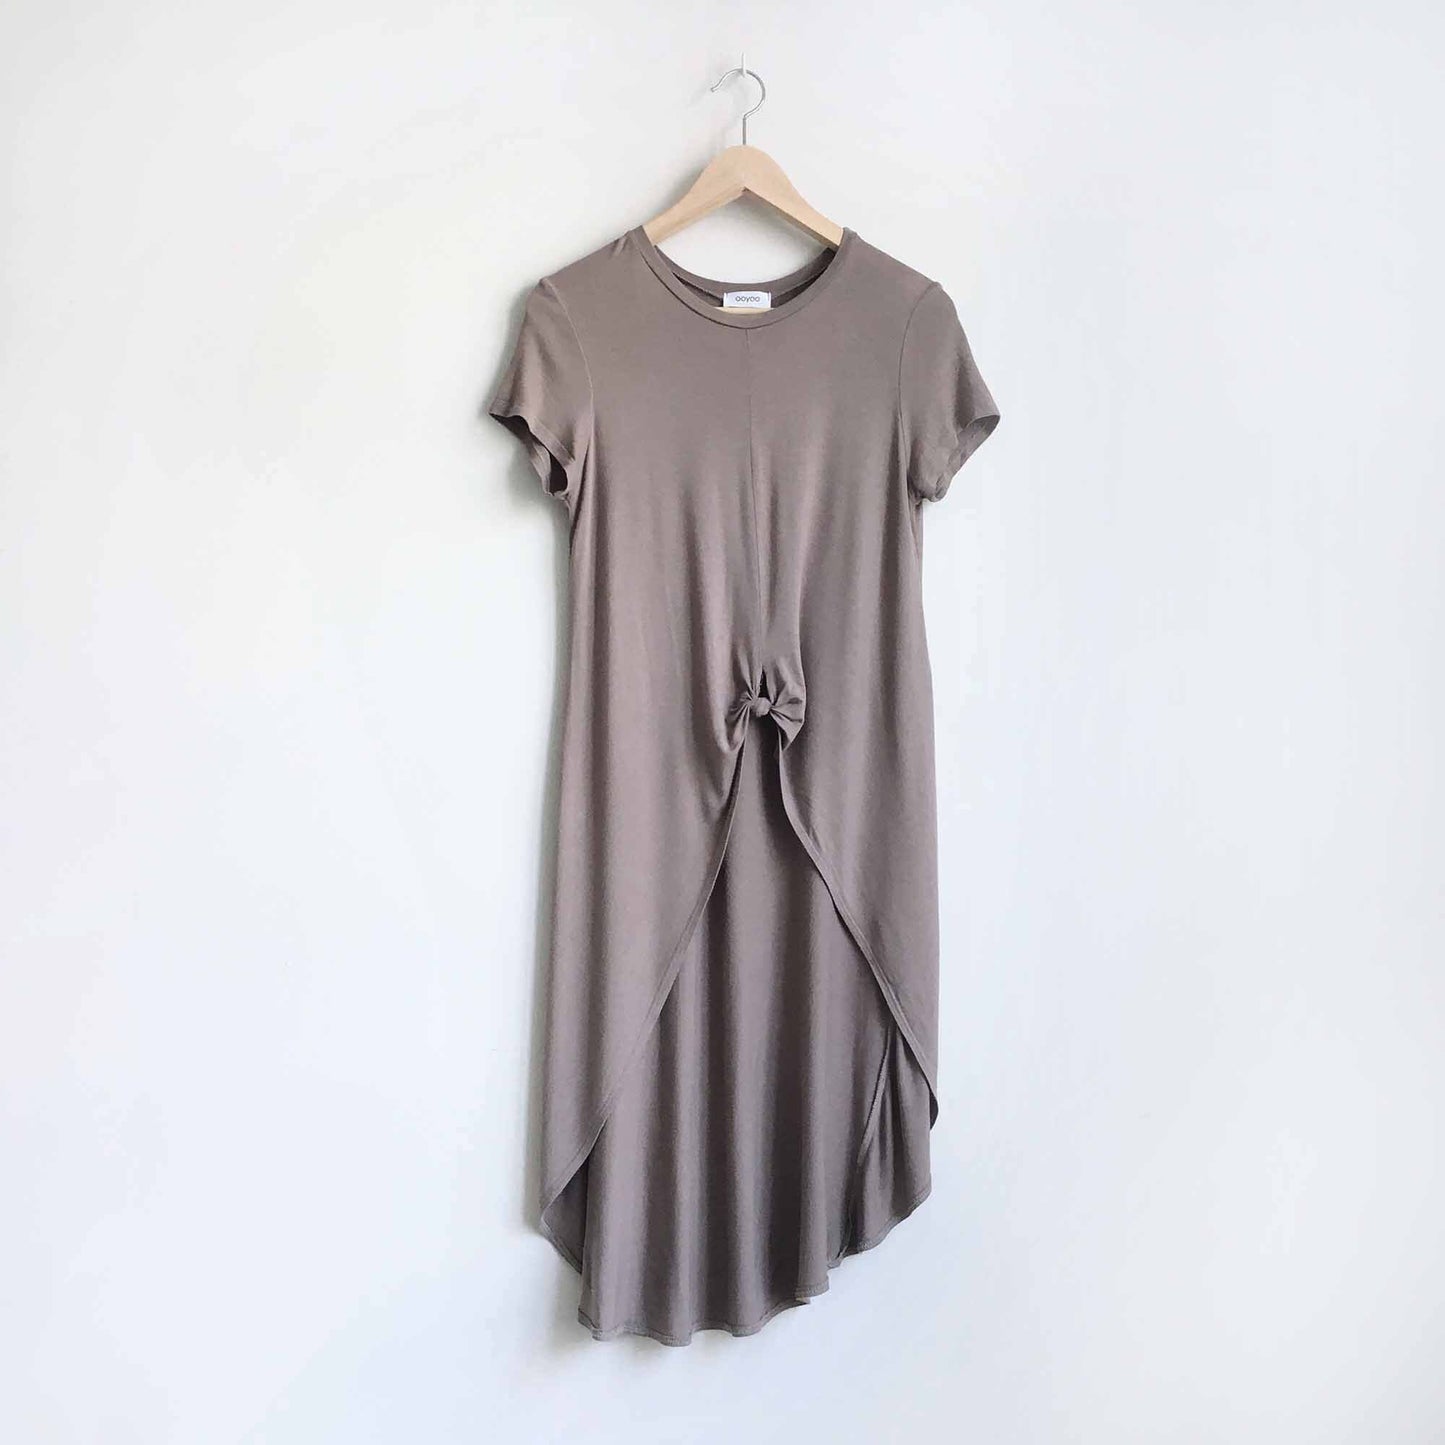 Ooyoo long knotted t-shirt - size Small